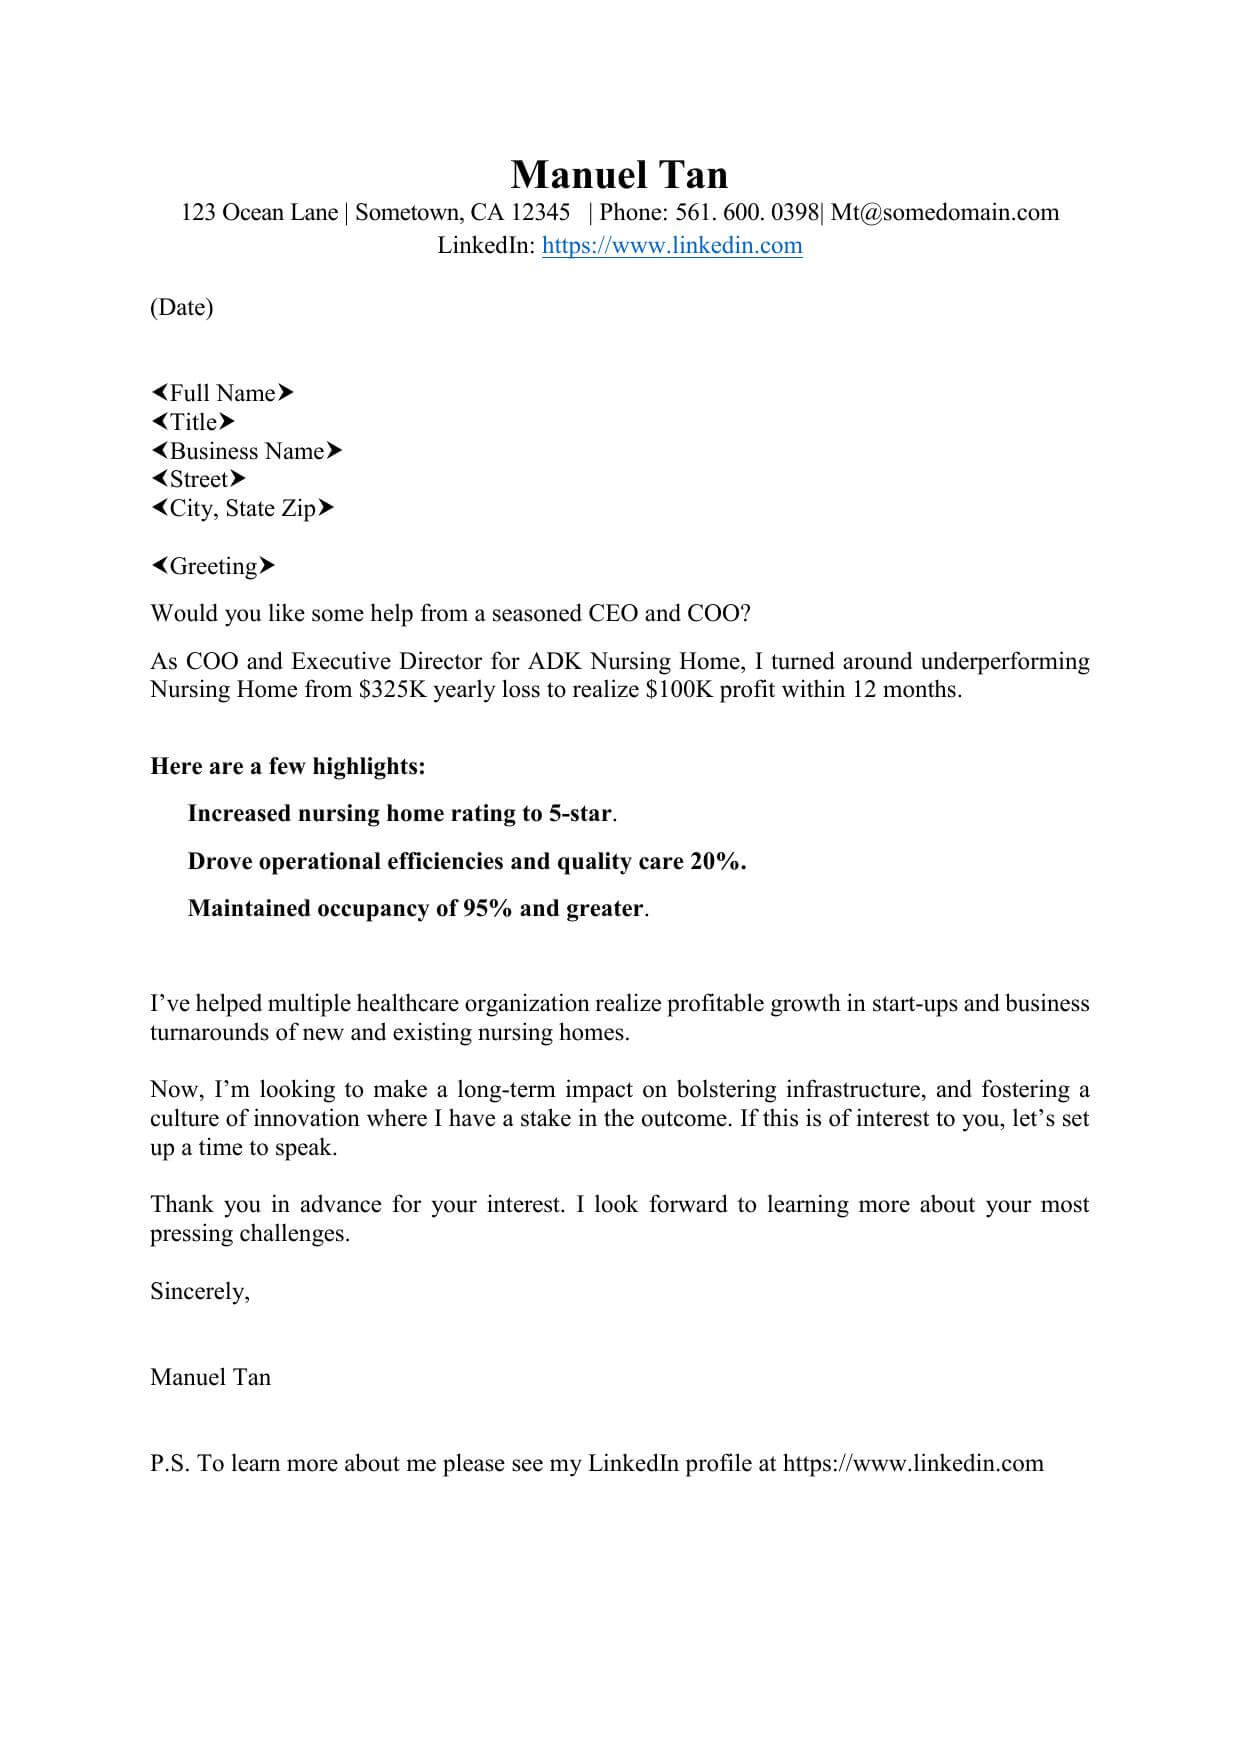 CEO & COO, Healthcare Value Proposition Letter Sample (1)